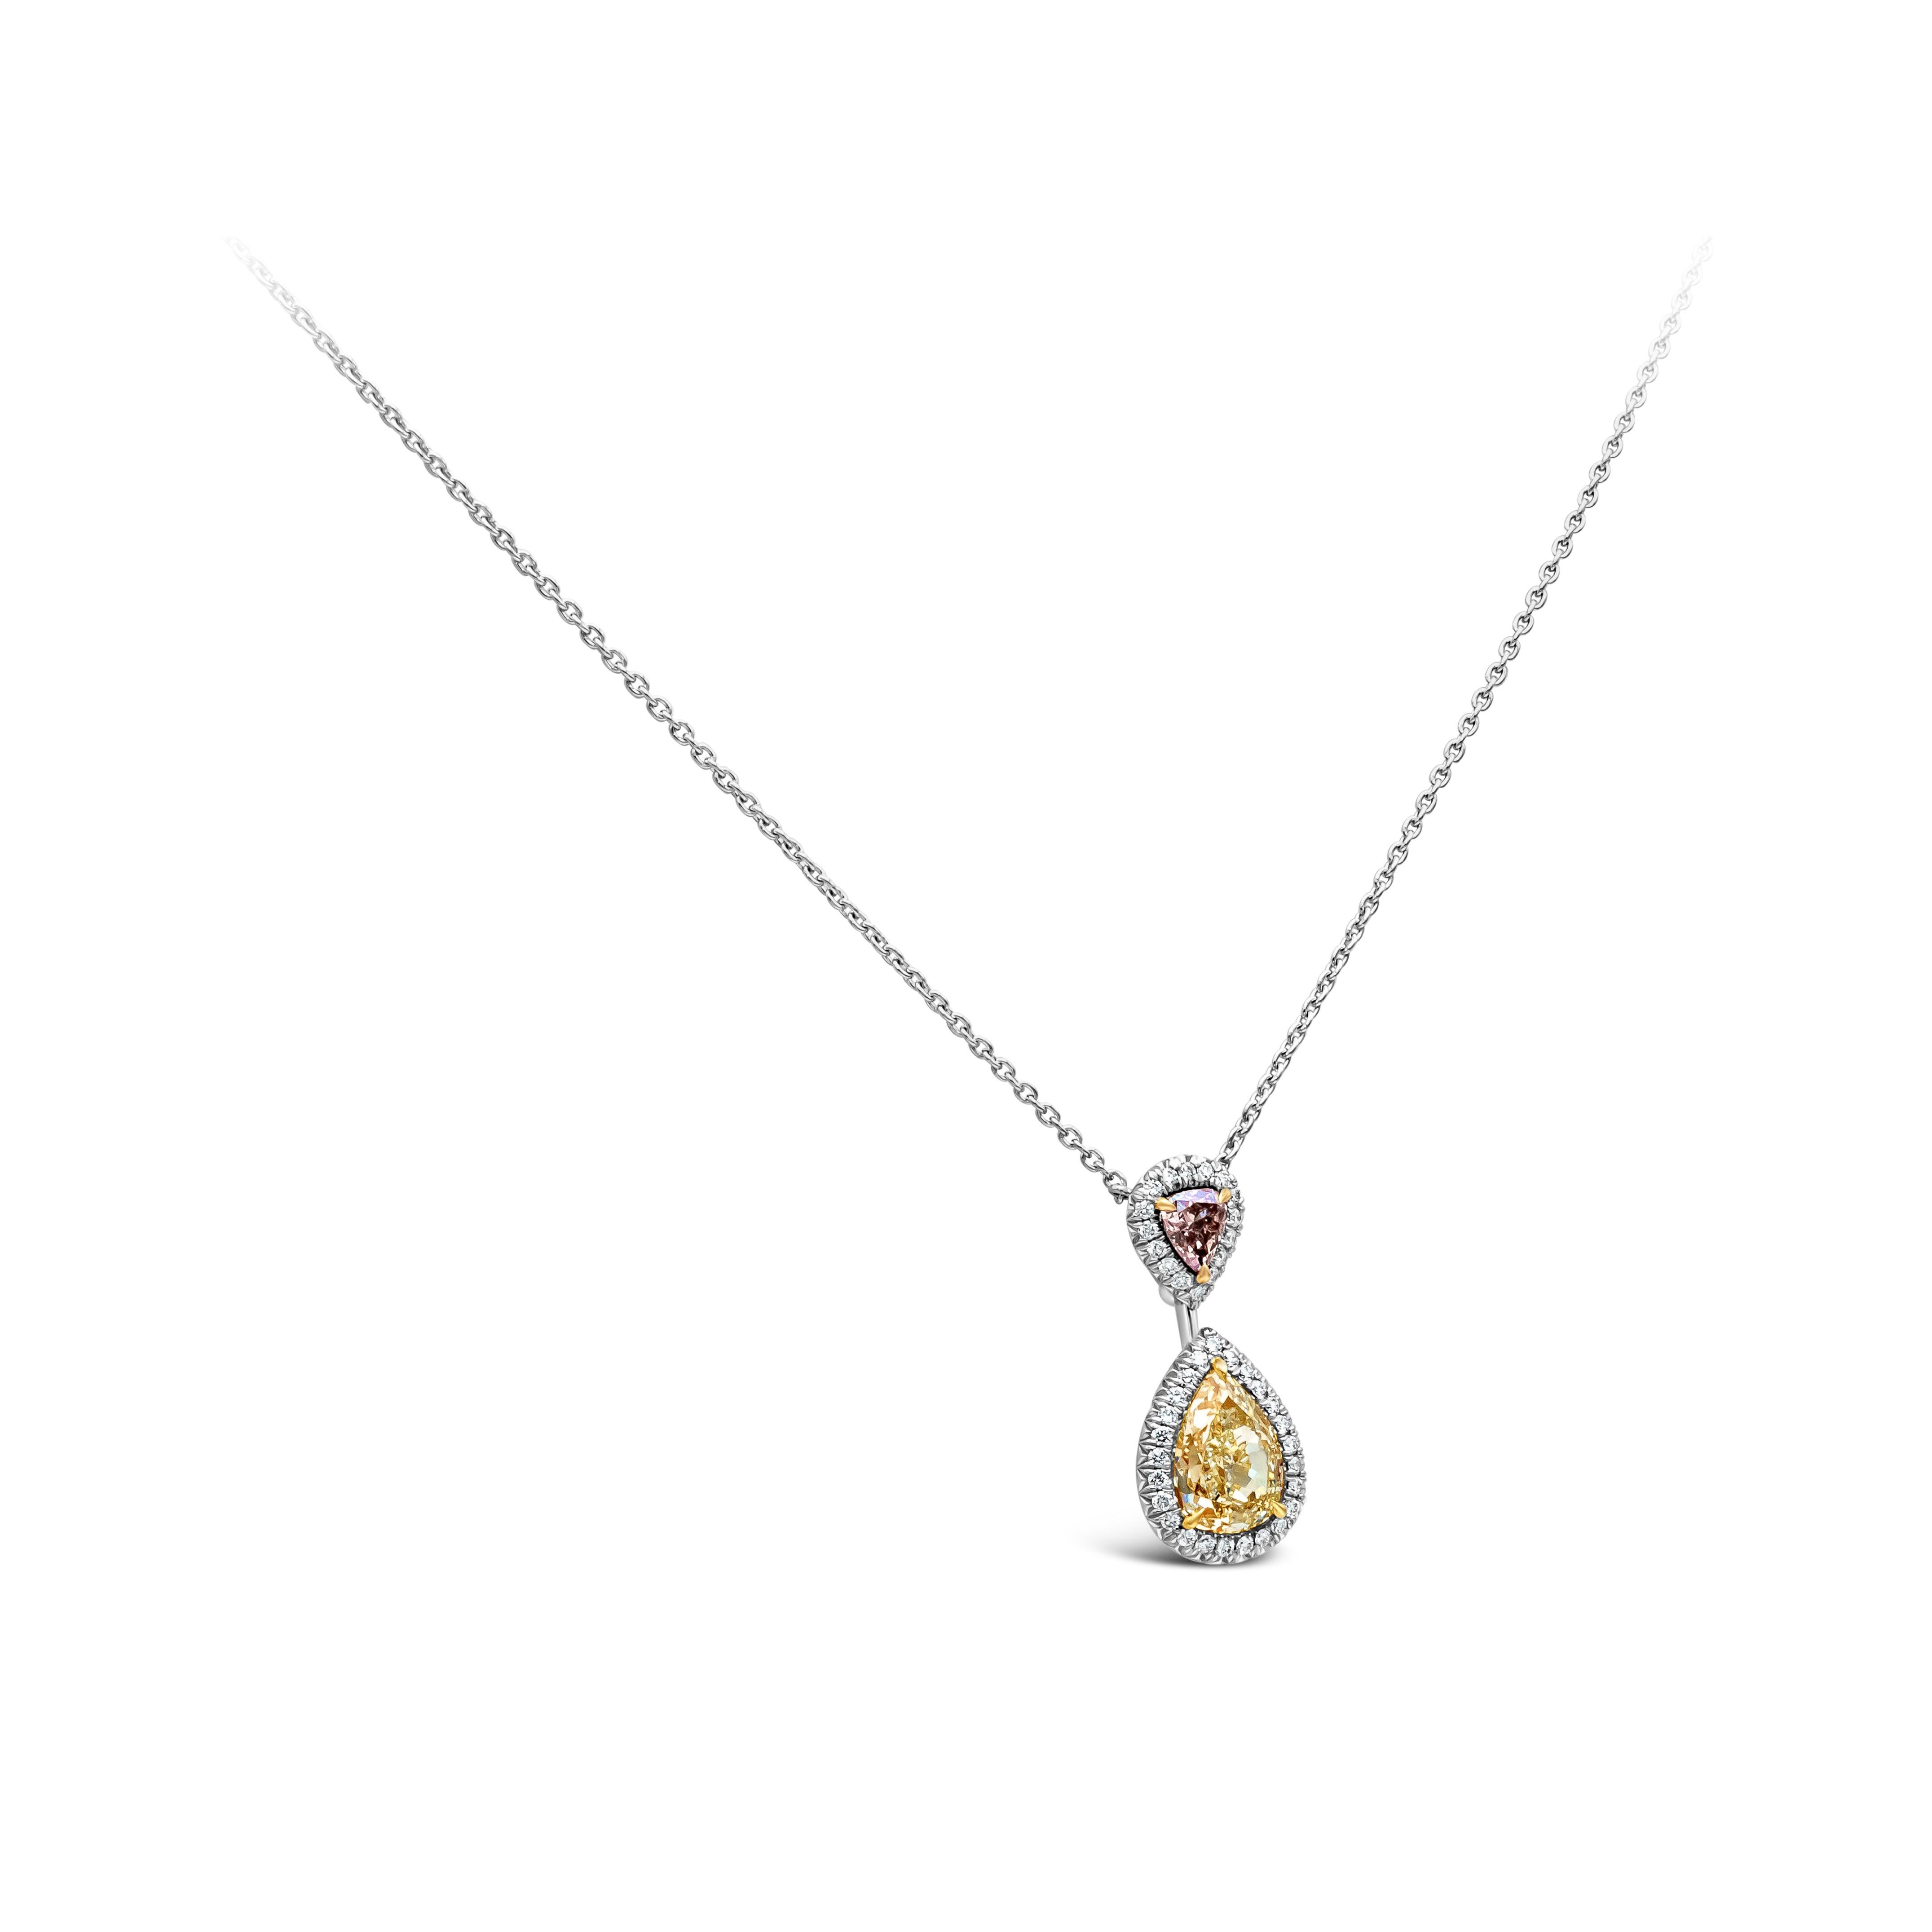 This beautiful pendant necklace showcasing a GIA Certified 1.69 carat pear shape light yellow diamond suspended on a GIA Certified 0.25 carat heart shape fancy blue pink diamond. Surrounded by 41 brilliant round white diamonds weighing 0.22 carts